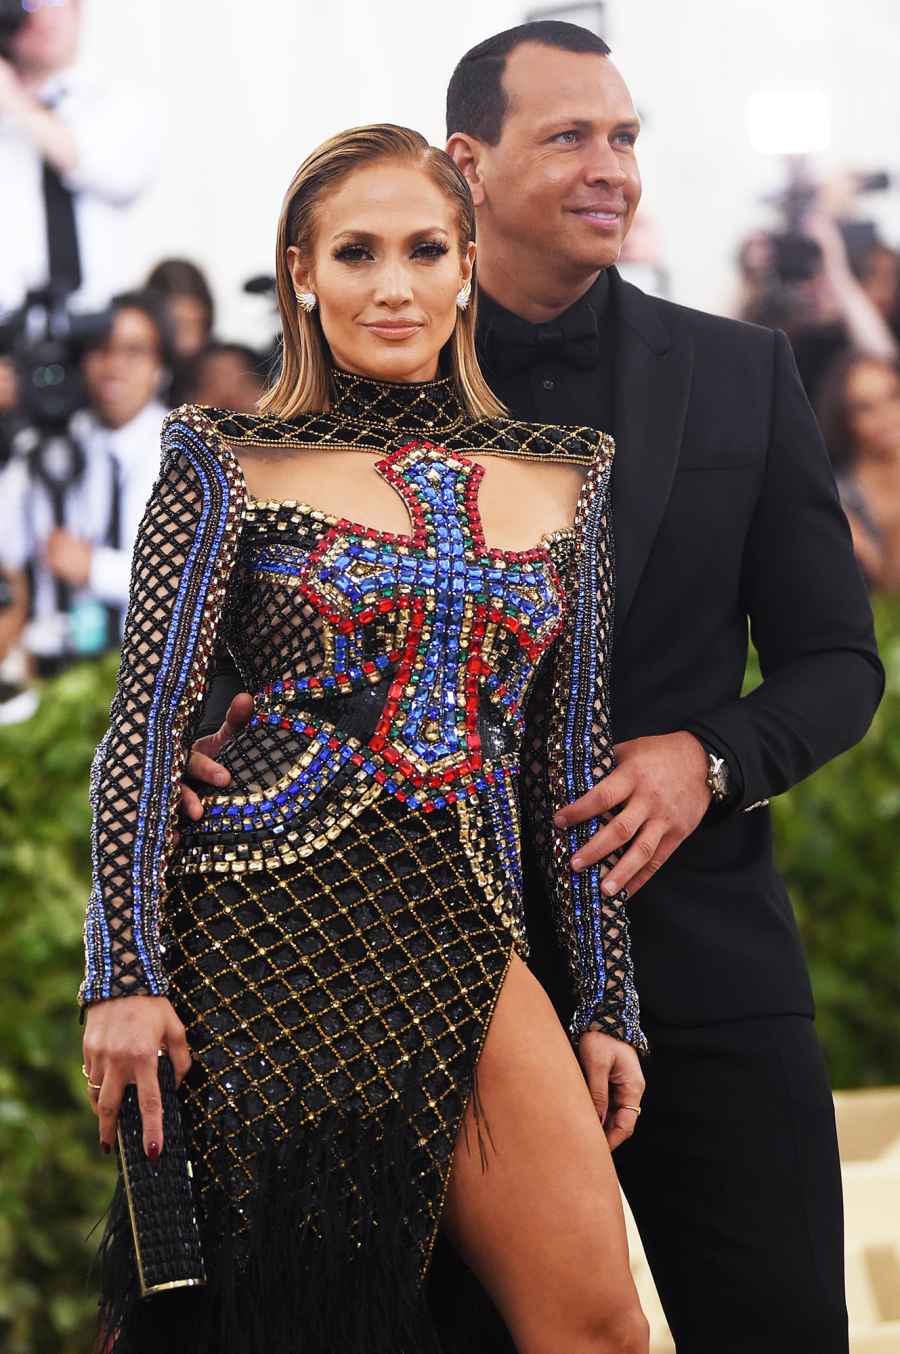 Jennifer Lopez’s Dating History: A Timeline of Her Famous Relationships, Exes and Flings